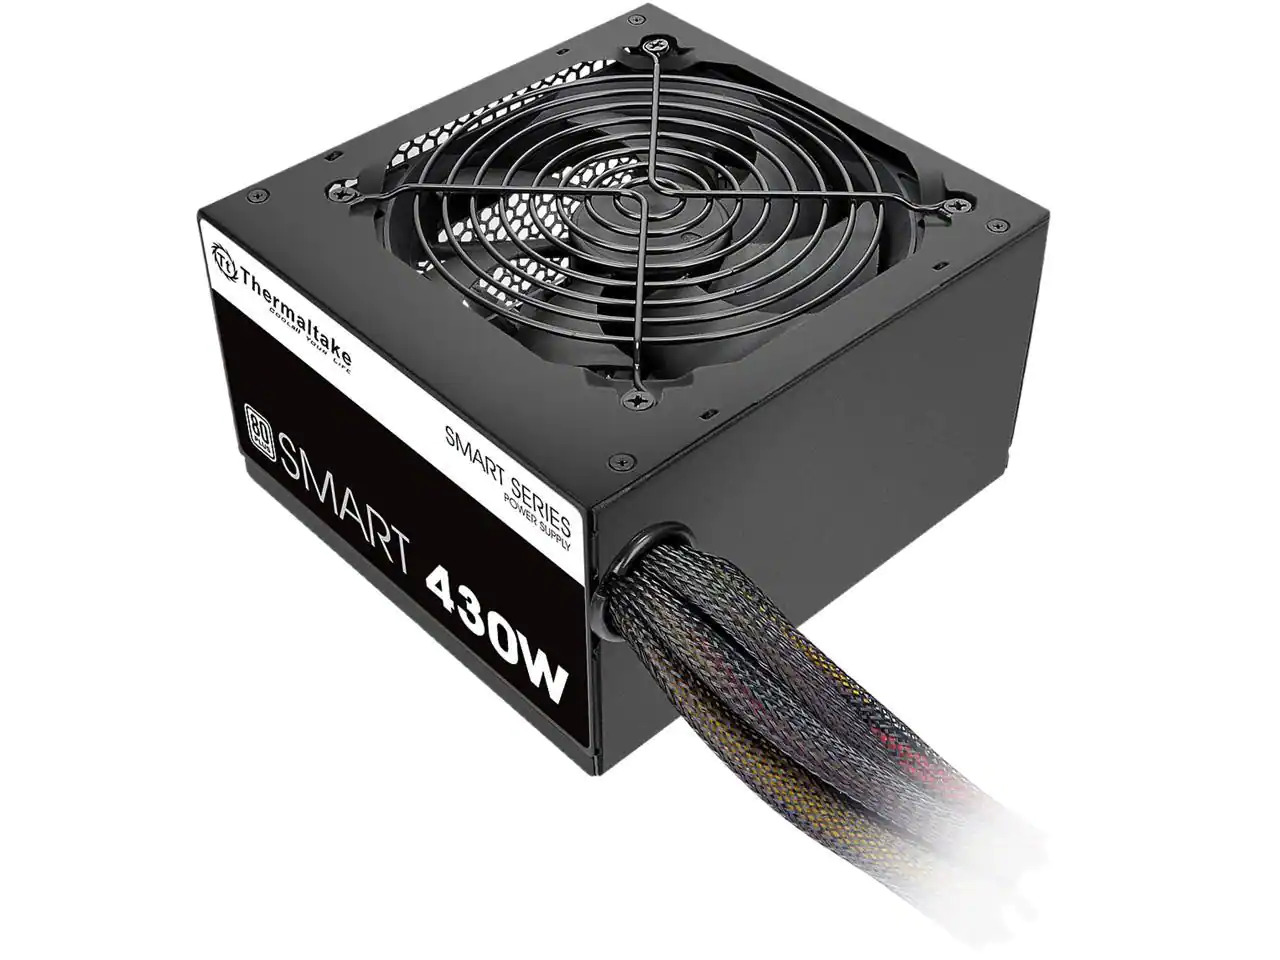 Thermaltake Power Supply Deals (as low as $19.99 after $10 MIR and Promo Code) $19.96